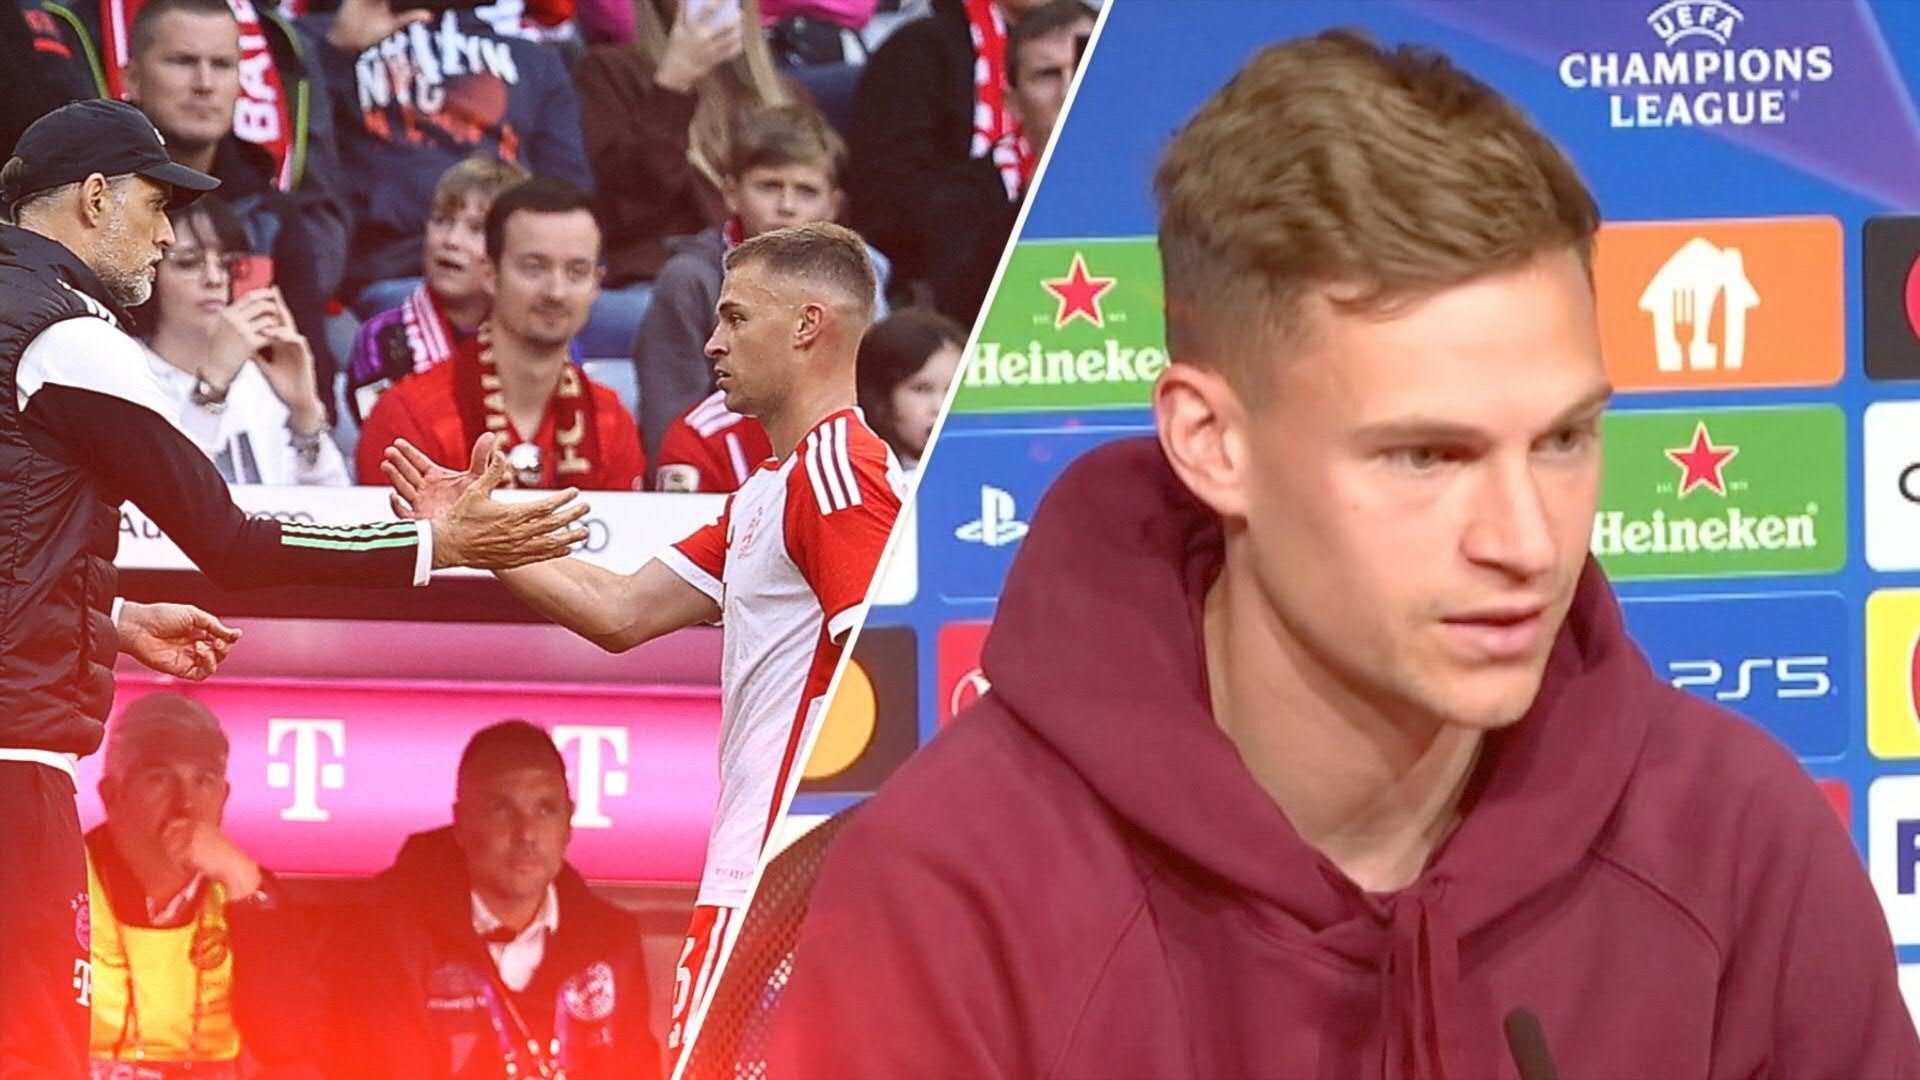 Kimmich counters Hoeneß criticism: “Every player could take something with them”